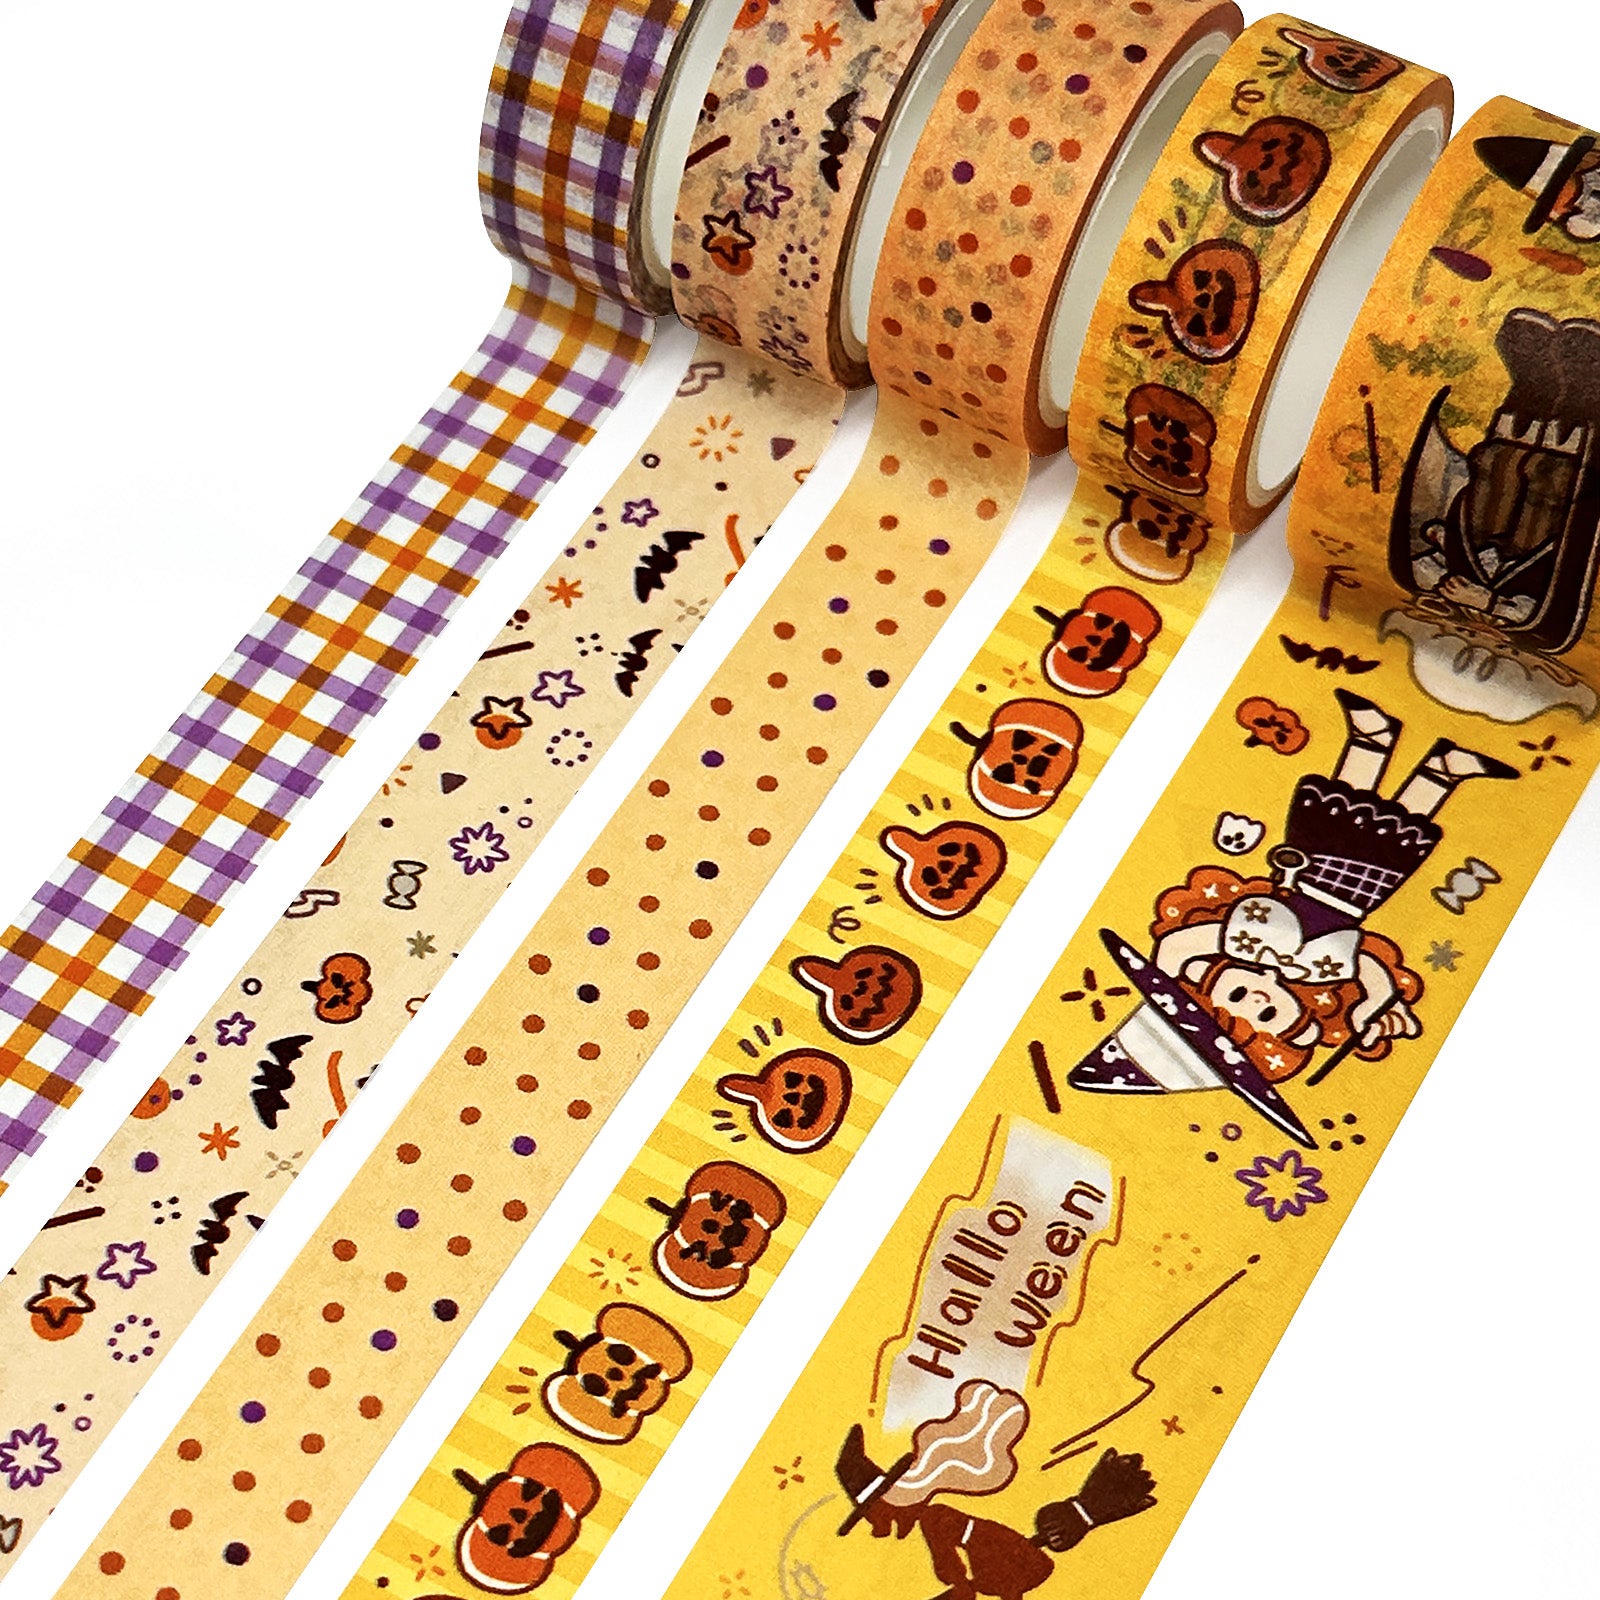  AEBORN Halloween Washi Tape - Holiday Washi Tape Set with Cat,  Pumpkin, Ghost, Witch, Perfect for Bullet Journal, DIY Crafts, Planner,  Scrapbook, Gift Packaging : Arts, Crafts & Sewing